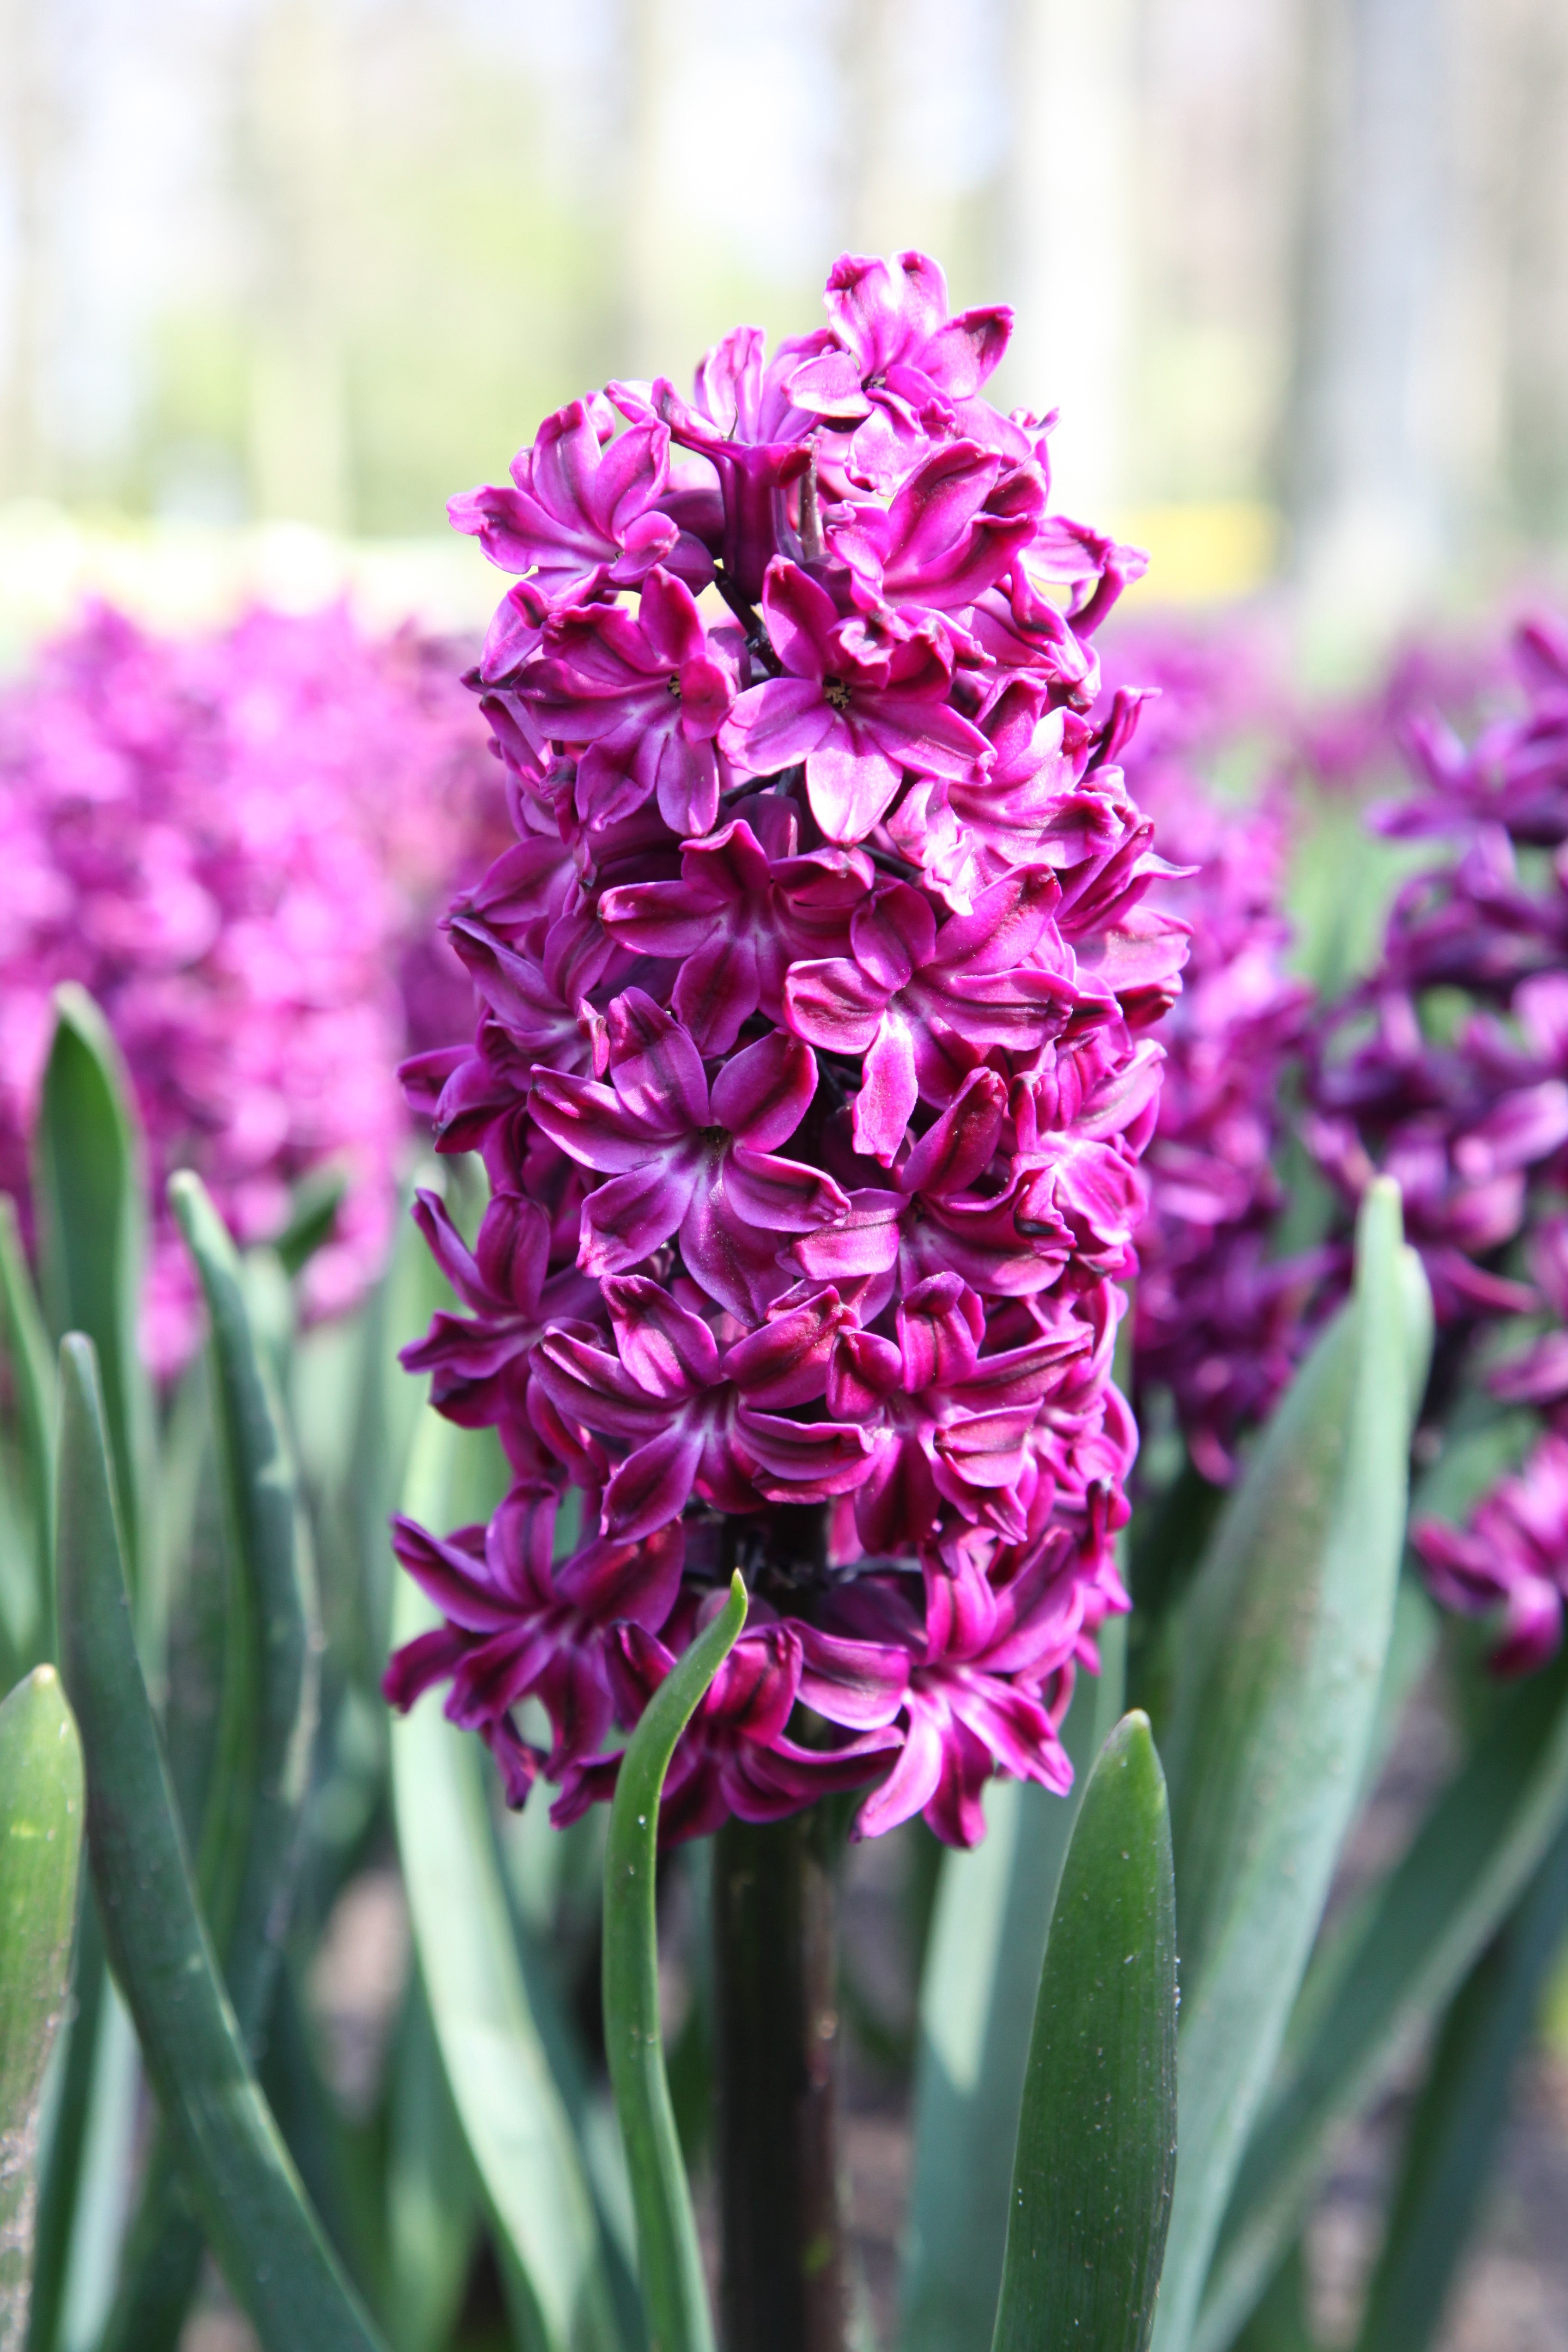 Beautiful hyacinth, called woodstock with purple florets and green foliage